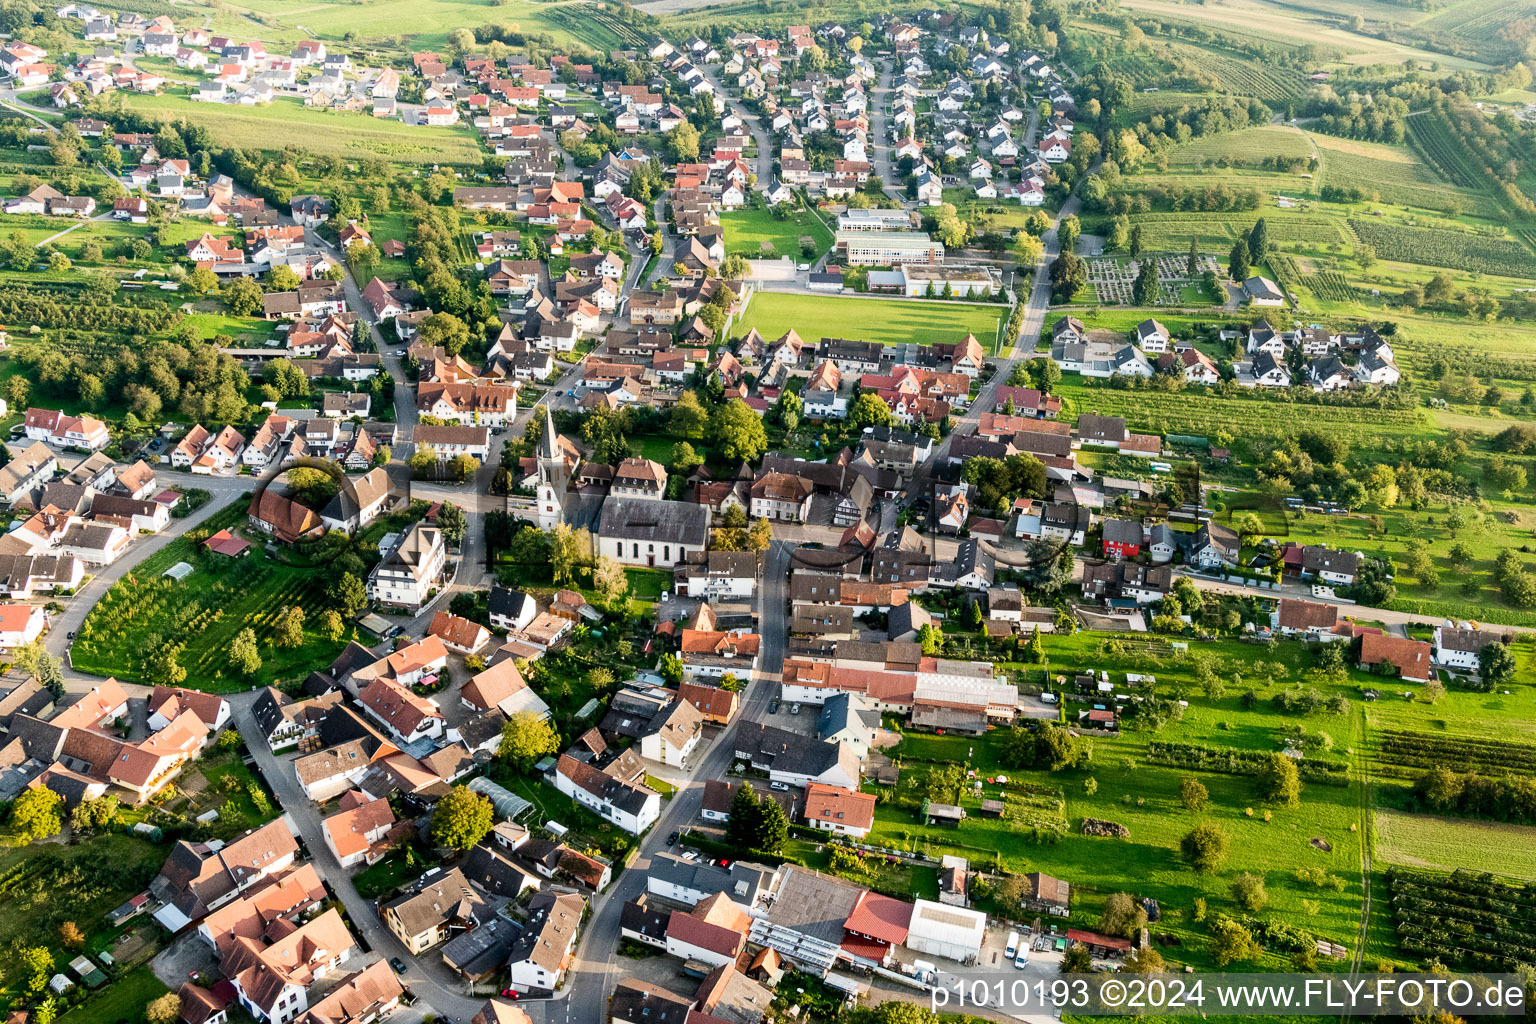 Village - view on the edge of agricultural fields and farmland in the district Nussbach in Oberkirch in the state Baden-Wurttemberg, Germany